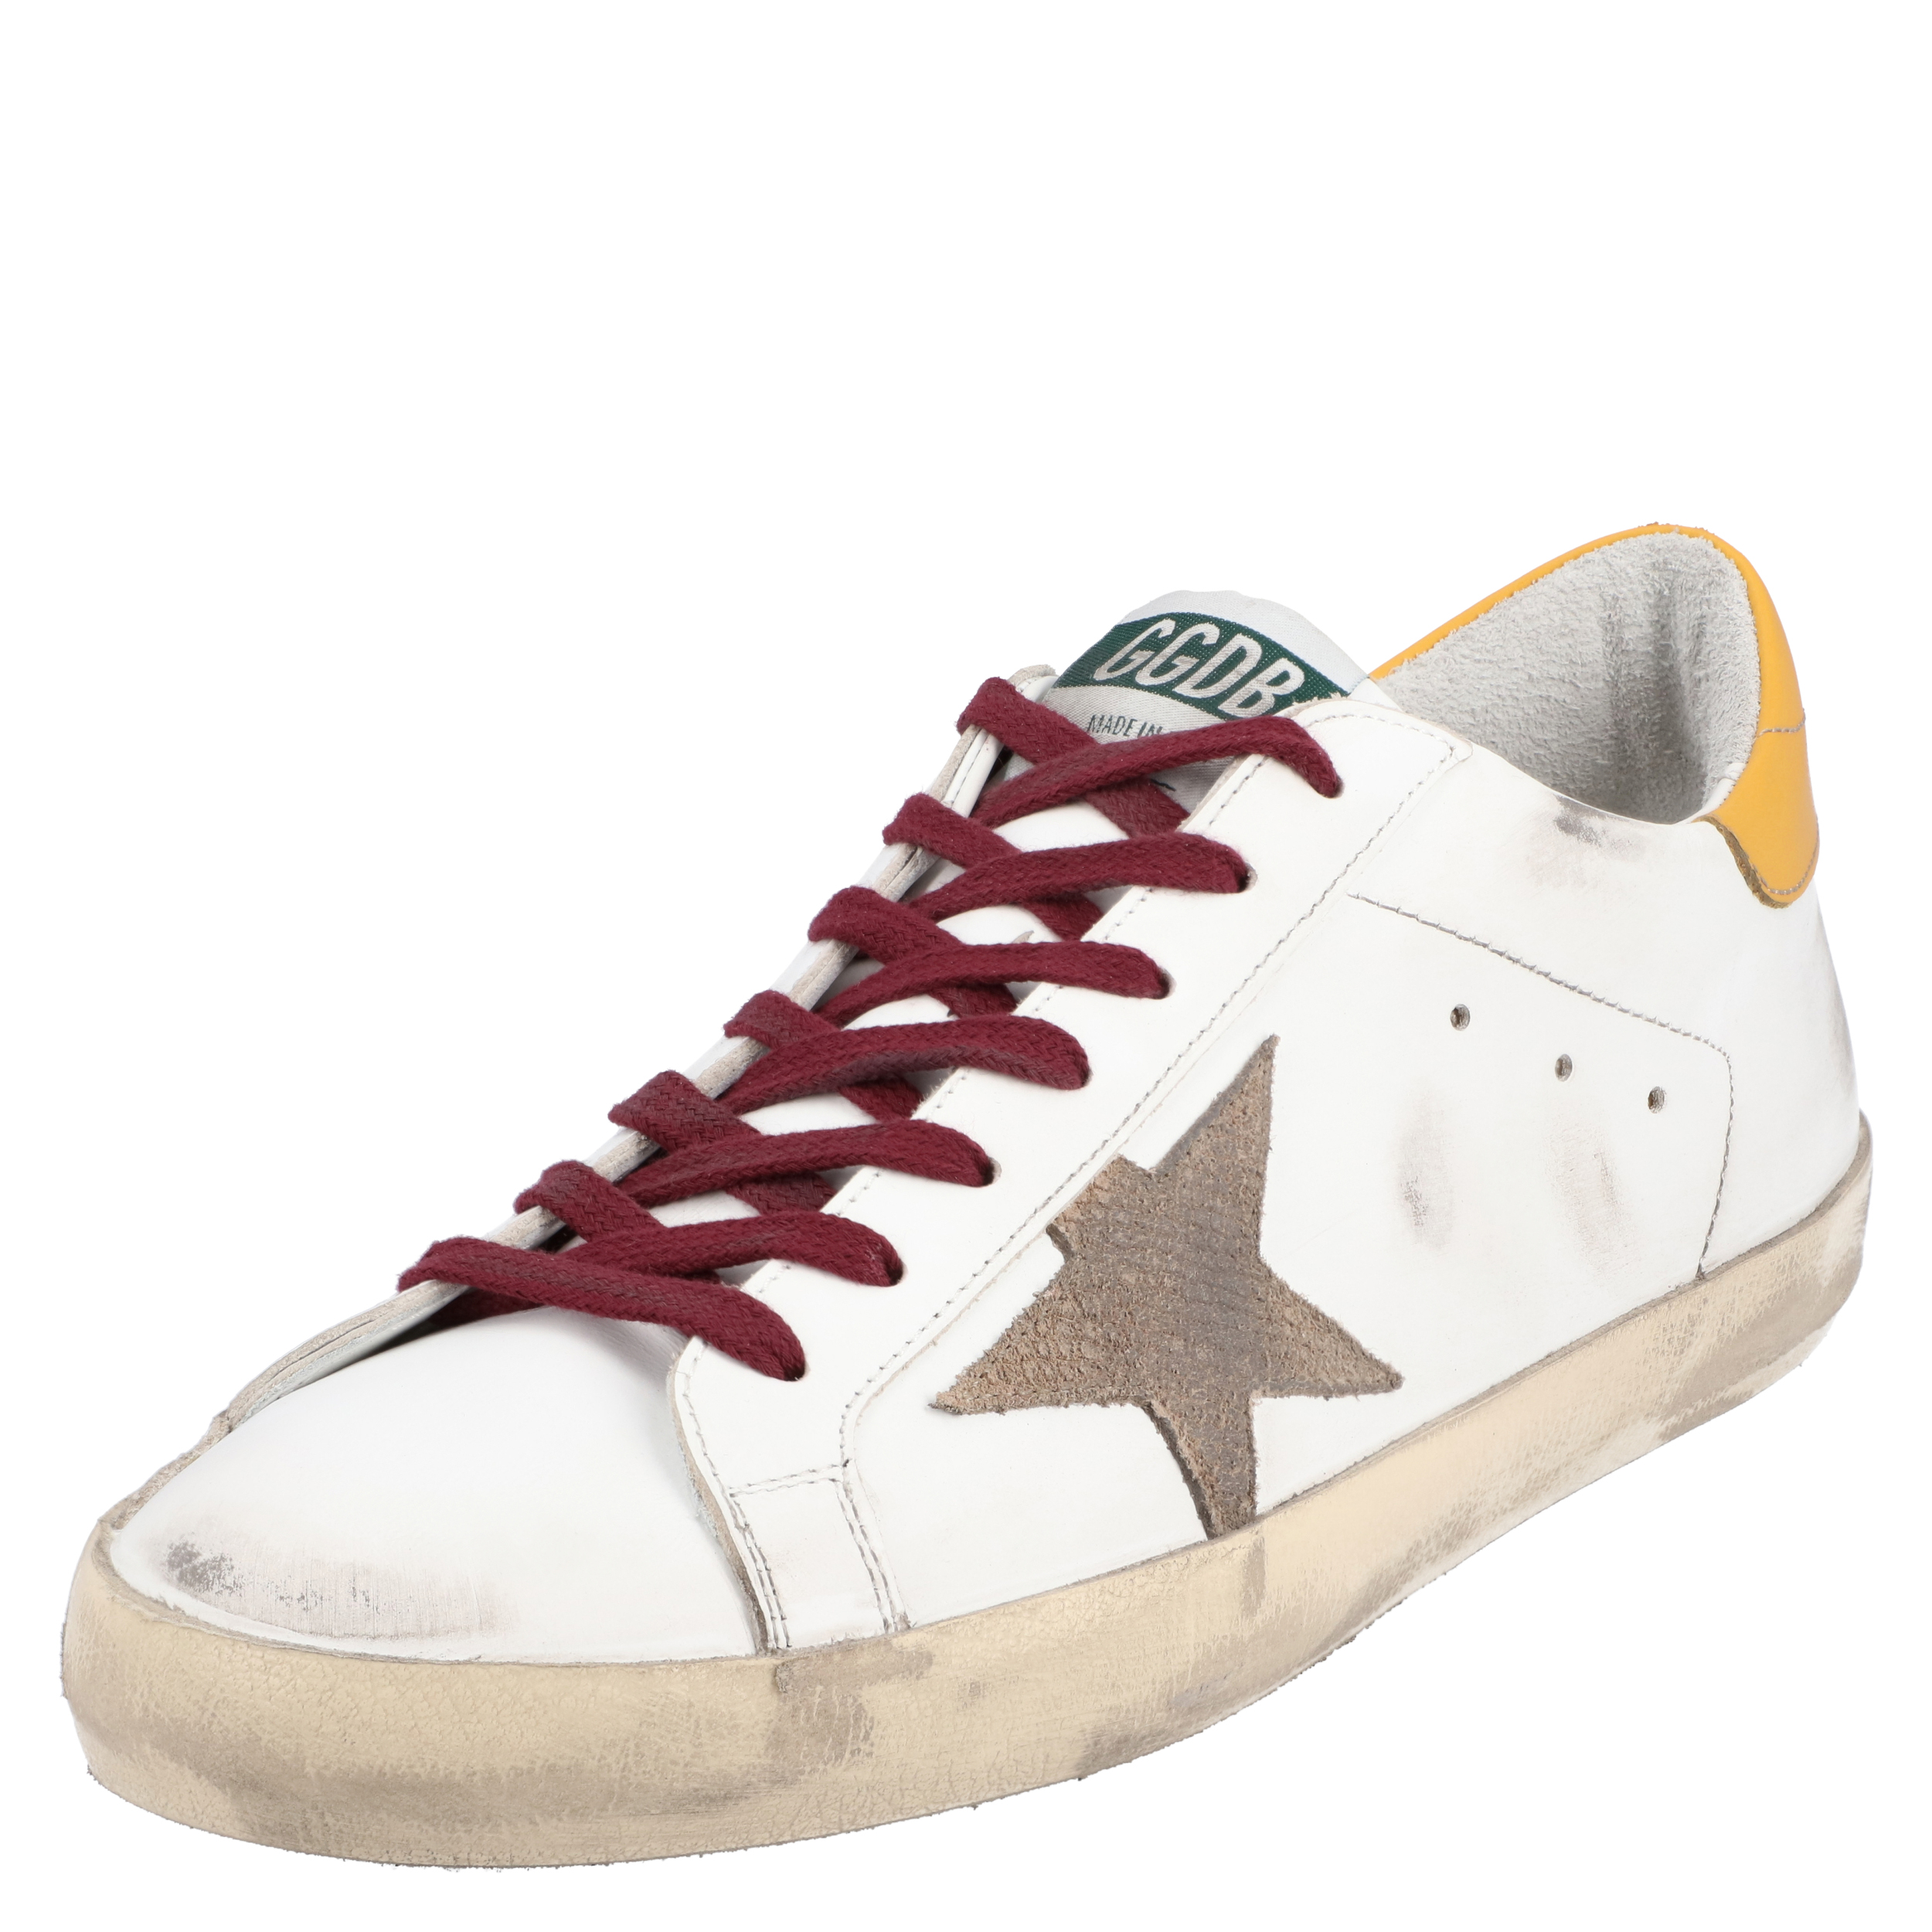 Golden Goose White/Yellow Leather Superstar Sneakers Size EU 44